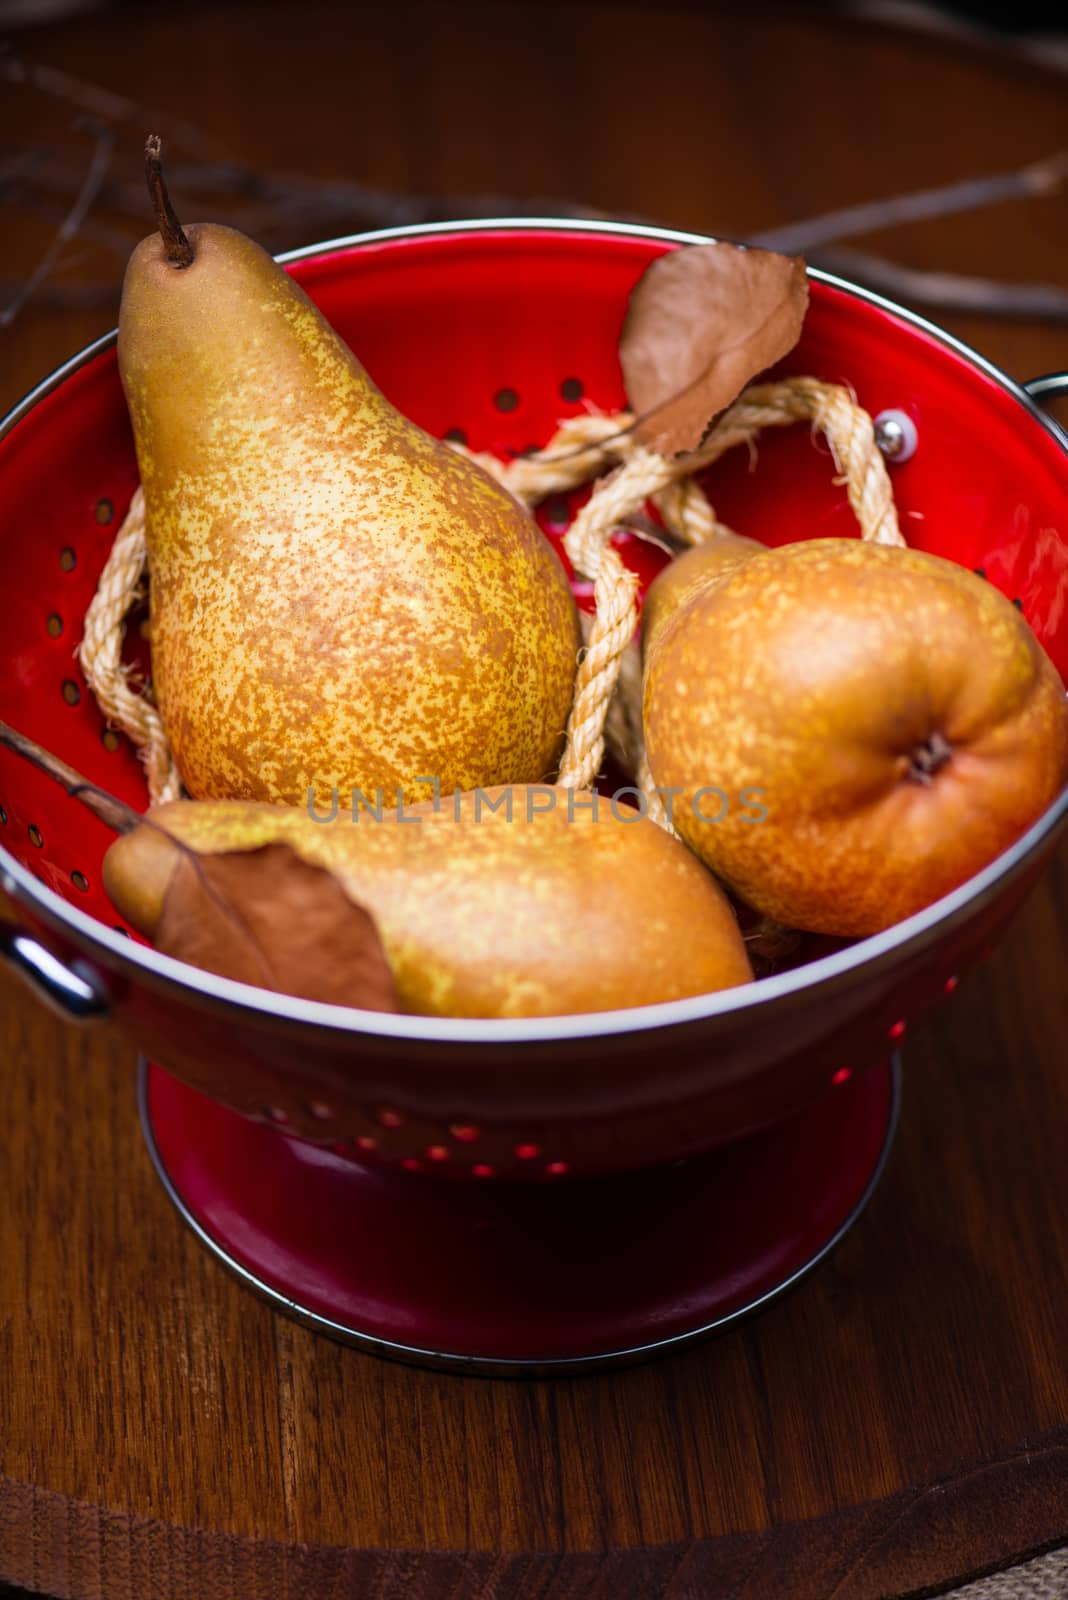 Two pears on a red colander with brown color wood background and ropes.